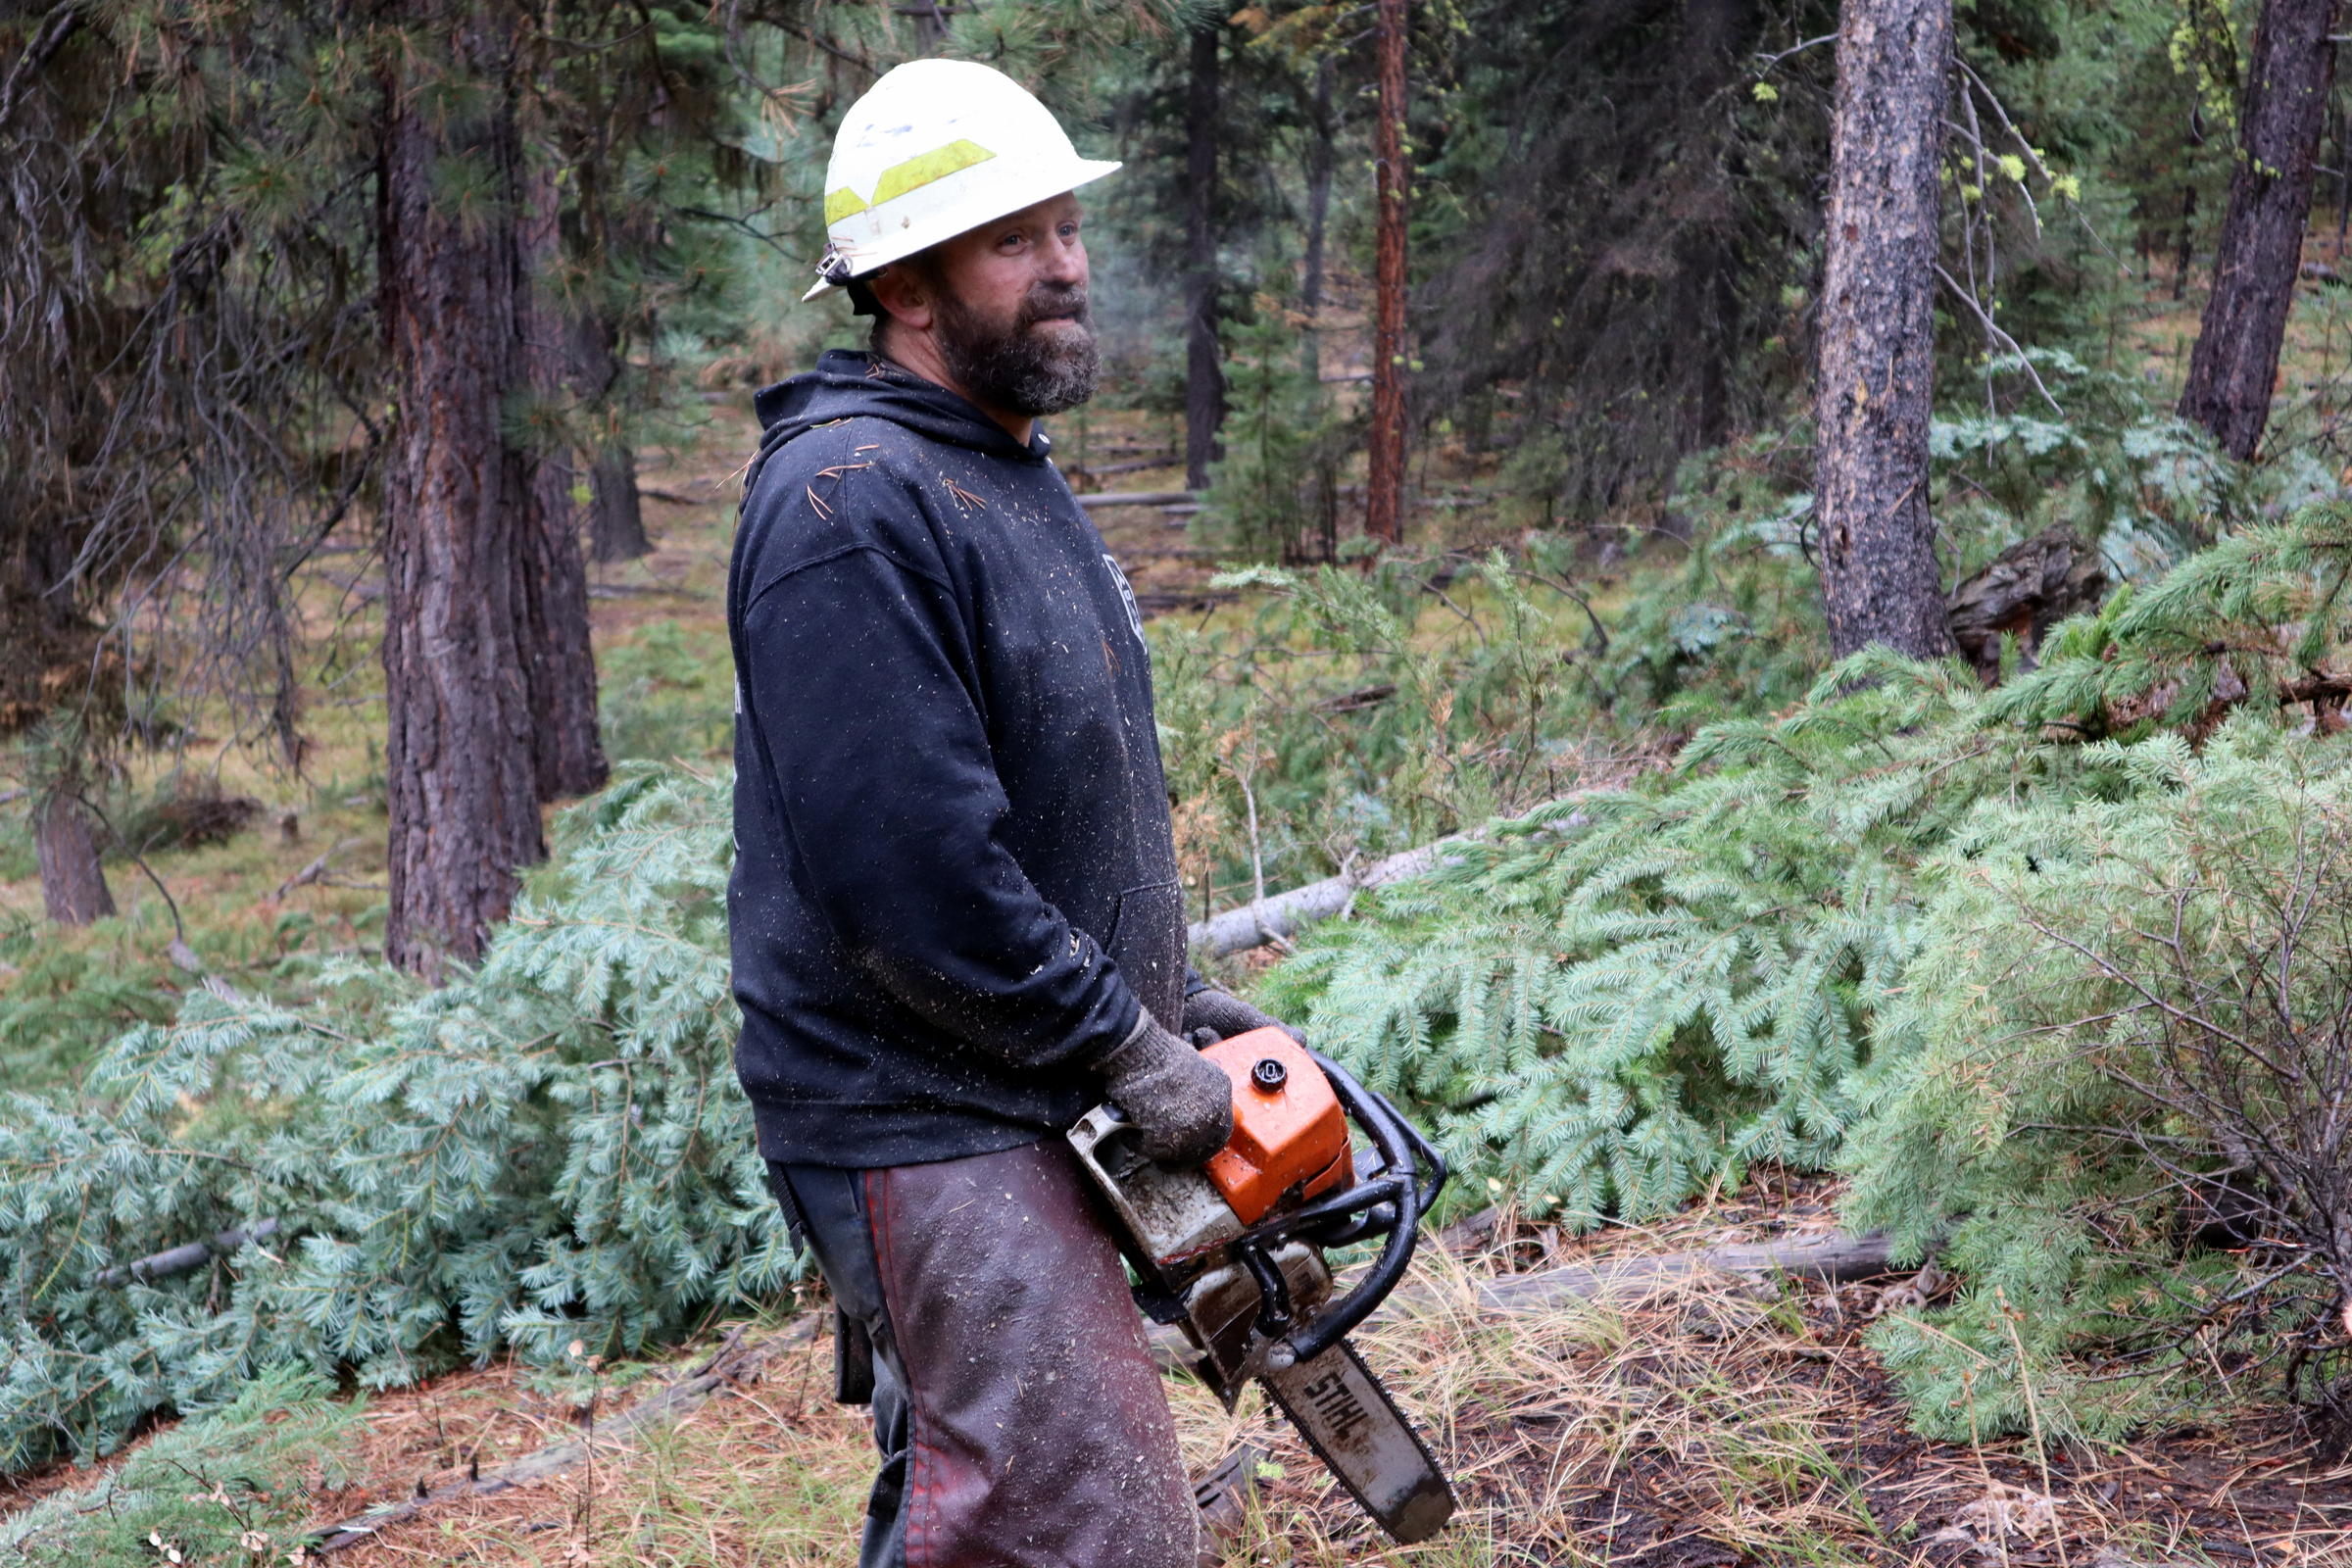 Grayback Forestry crew boss Bob Larkin at work on a thinning project in the Malheur National Forest. CREDIT: TOM BANSE